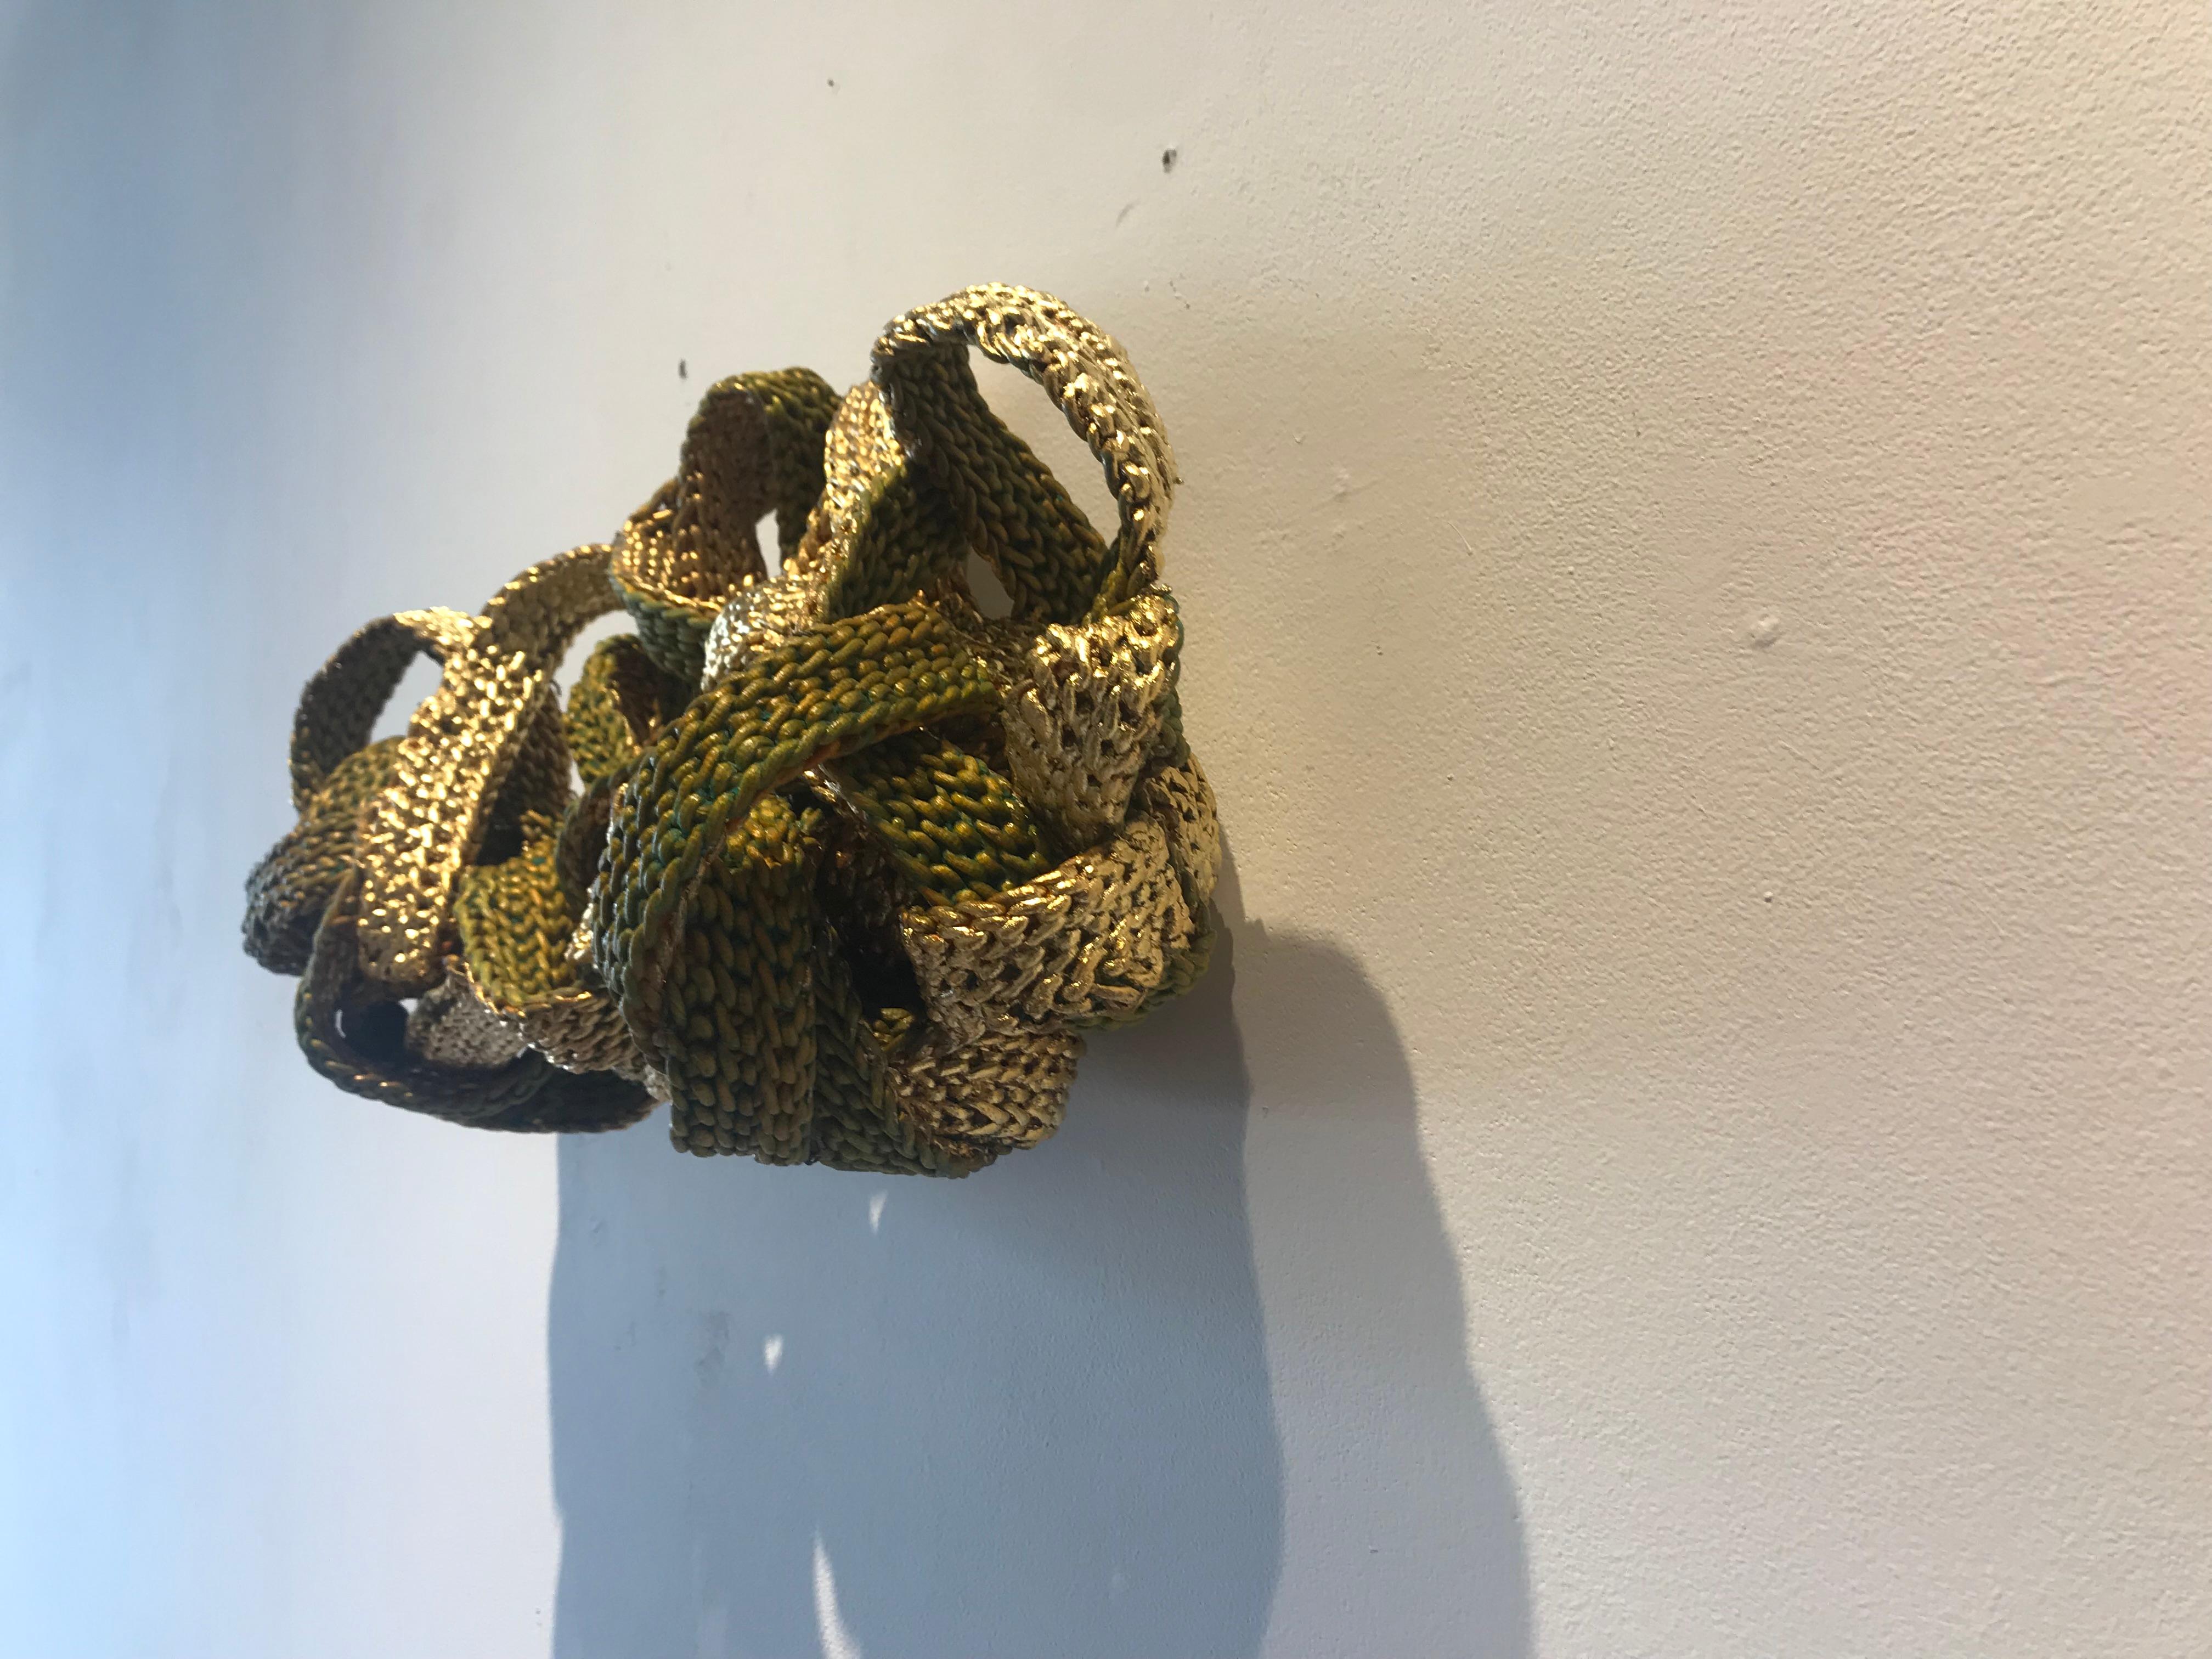 Louise Pappageorge's artwork incorporates found and newly created crochet and laces to construct sculptural bodies of work that are metal leafed and patinaed. She views these dimensional artworks as a dialogue about the initial feminized craft